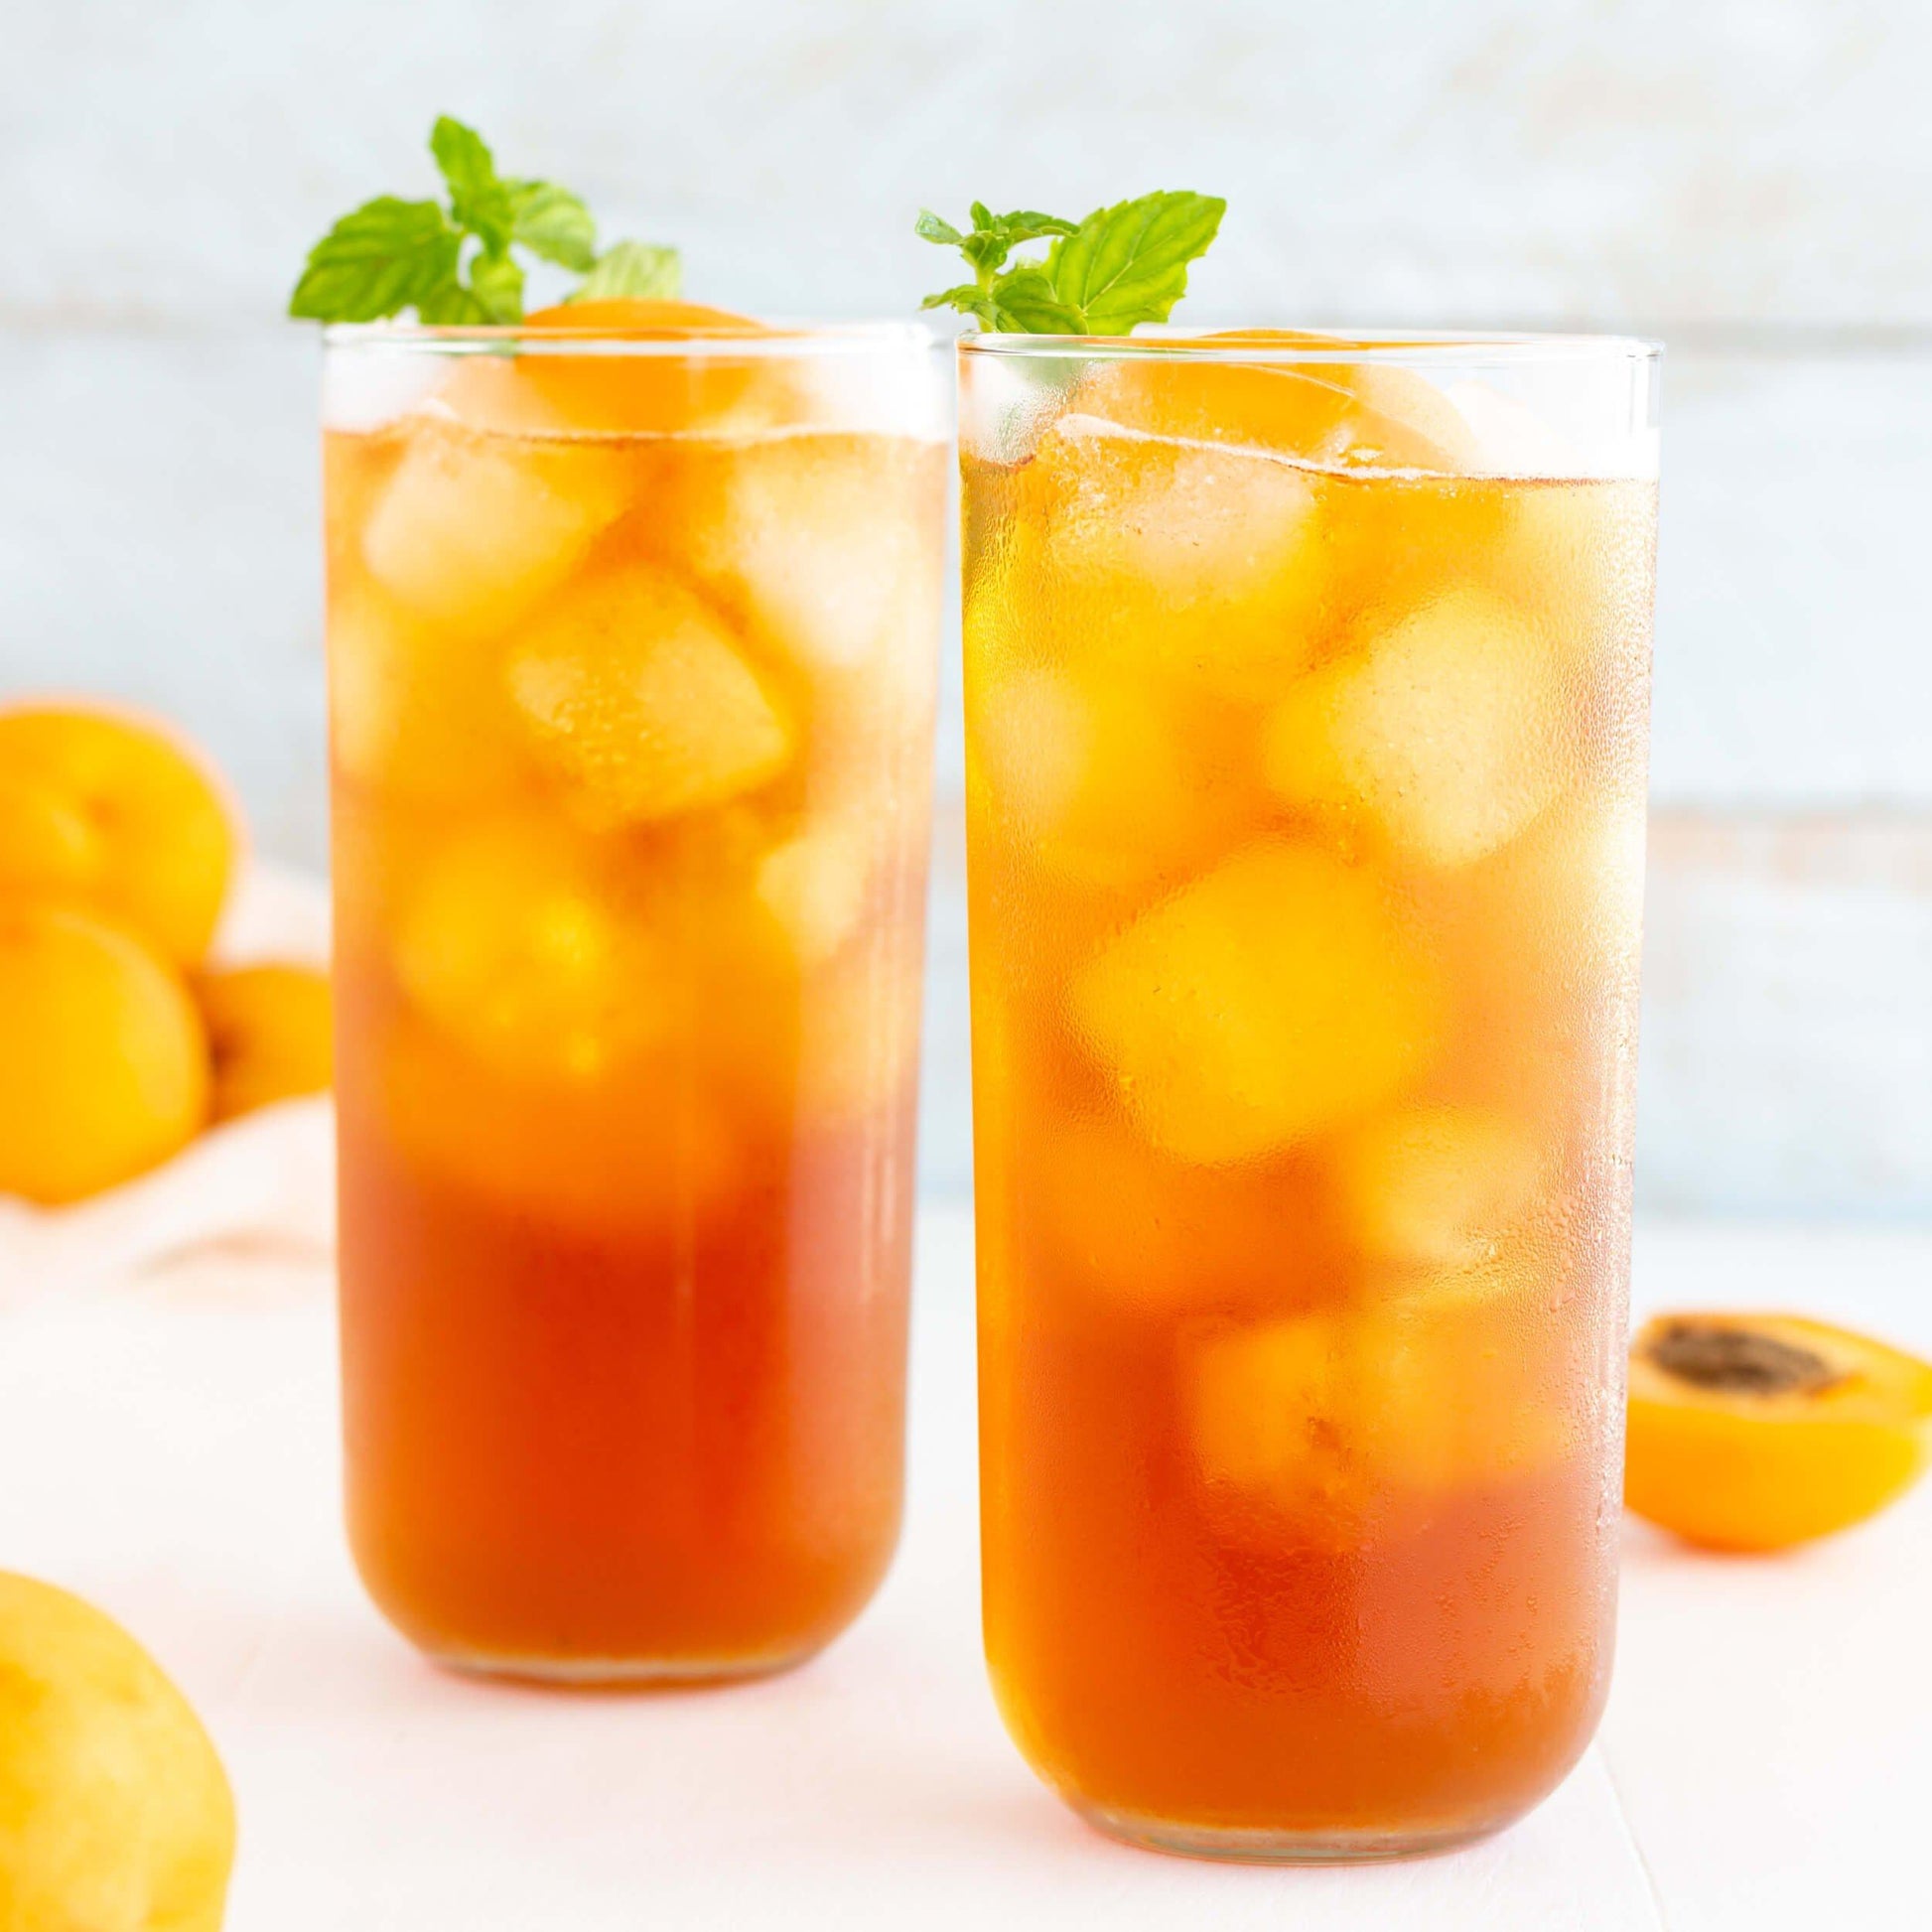 Apricot Brandy Organic Black Tea shown as iced tea in two tall glasses with mint sprigs